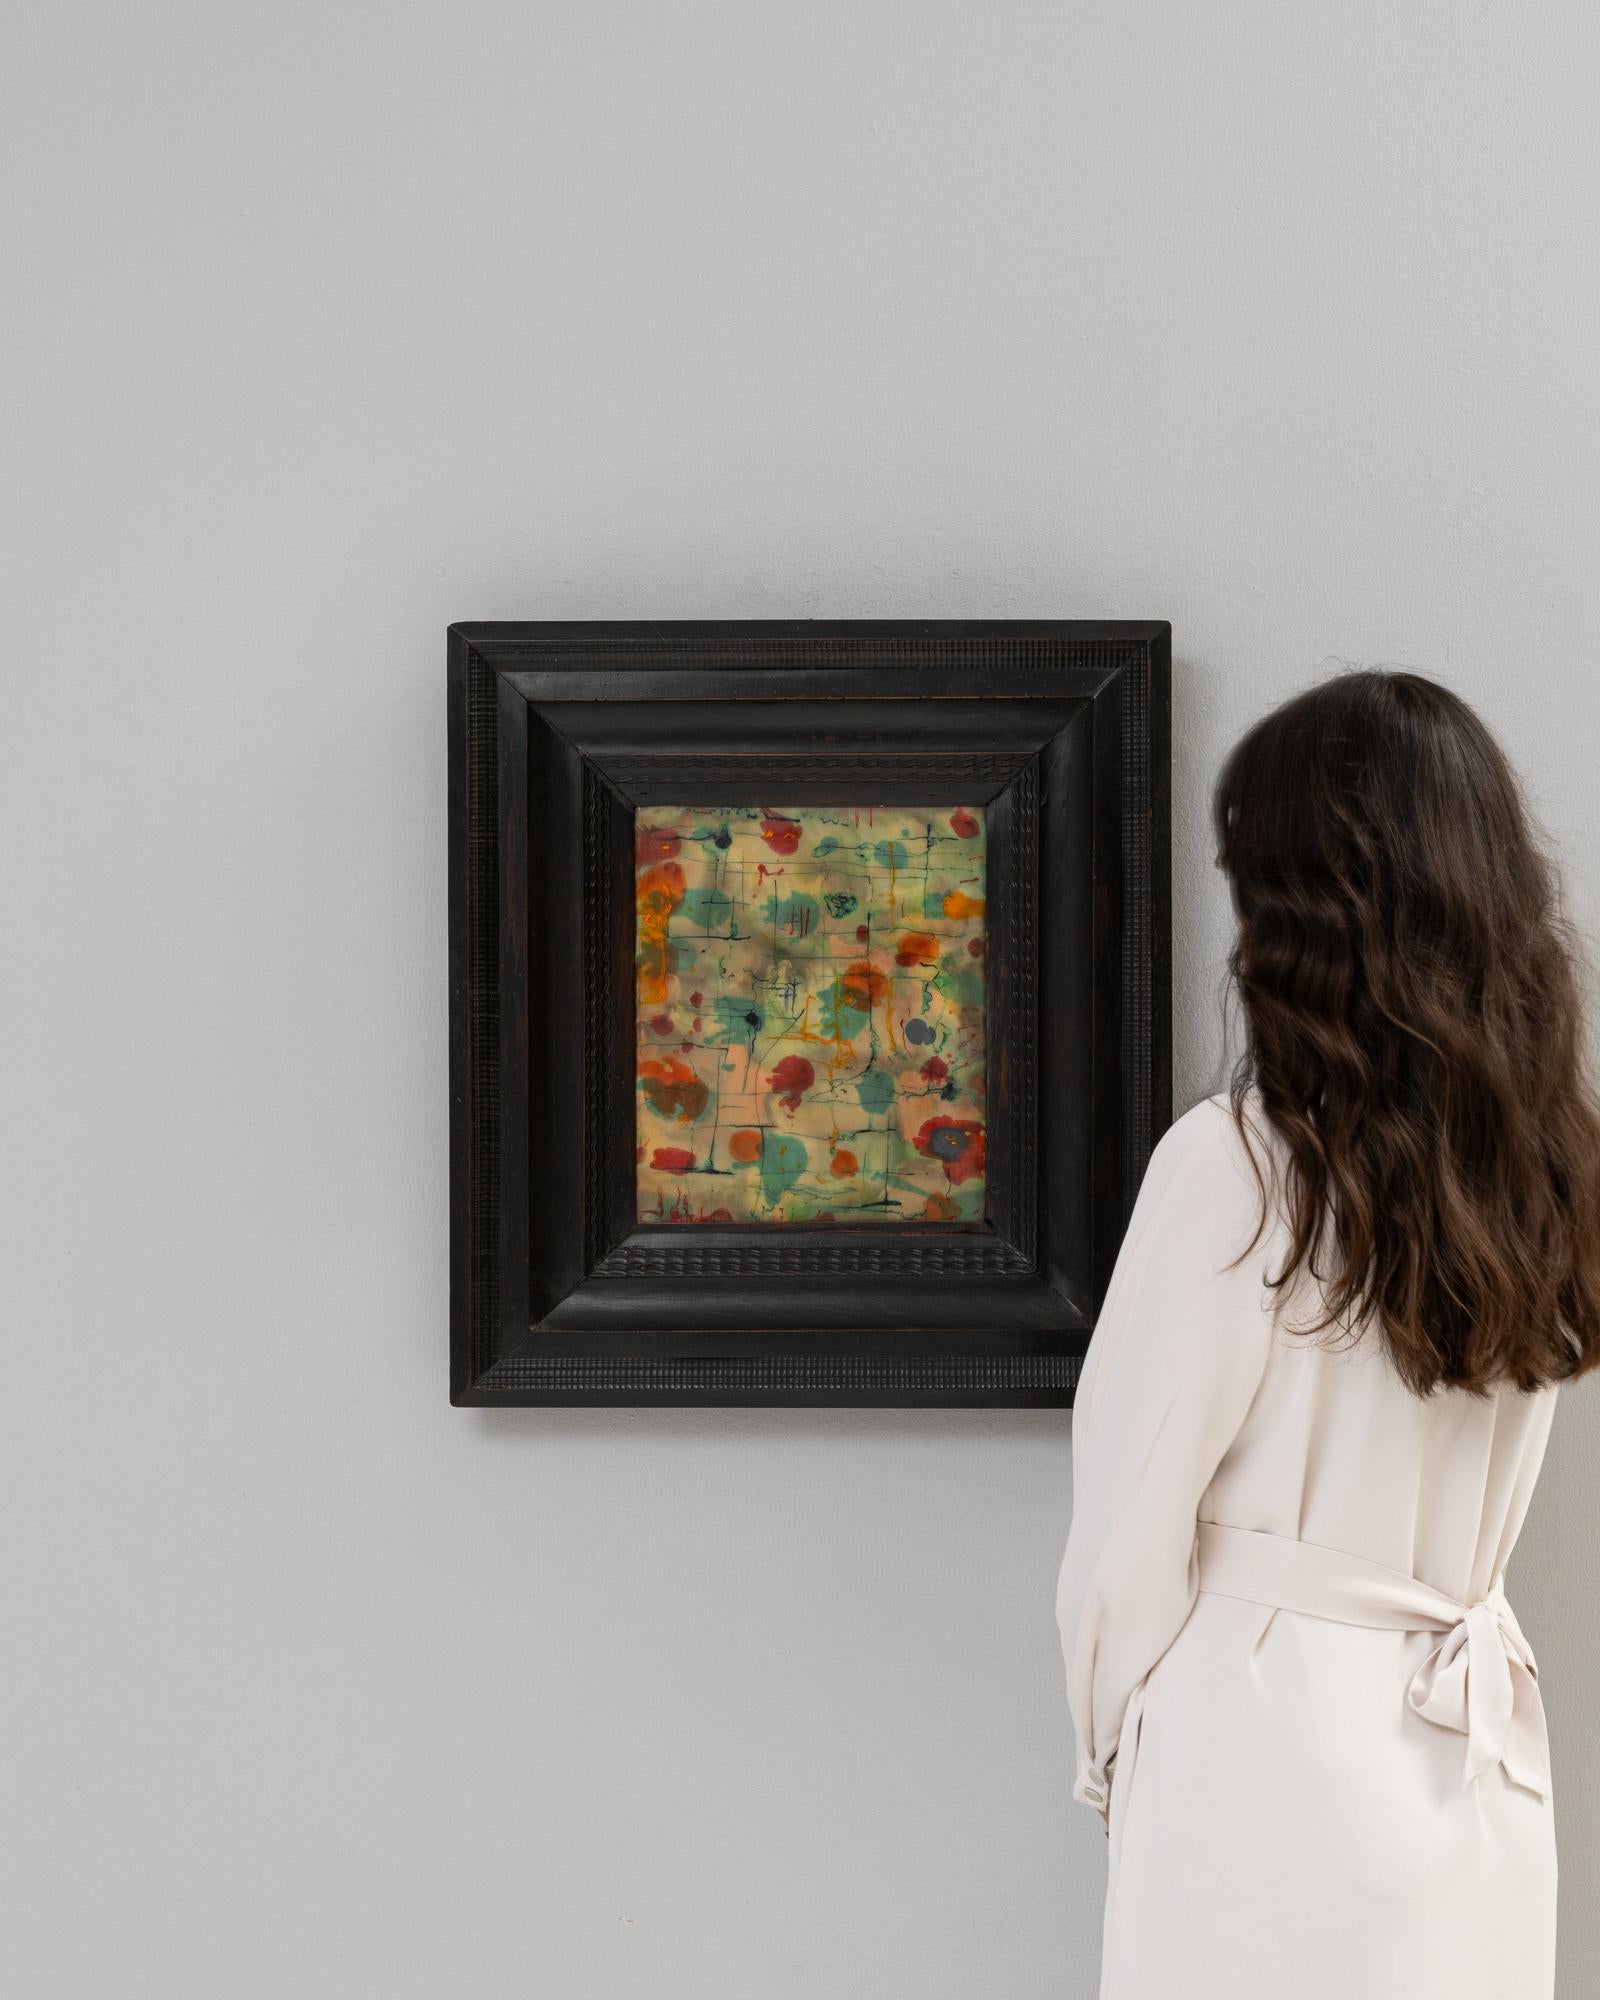 Nestled within a deep, dark frame, this 20th-century Belgian painting is a whimsical tapestry of vibrant colors and abstract forms. The compact canvas bursts with an array of playful, bright spots that dance across a subtly textured background,